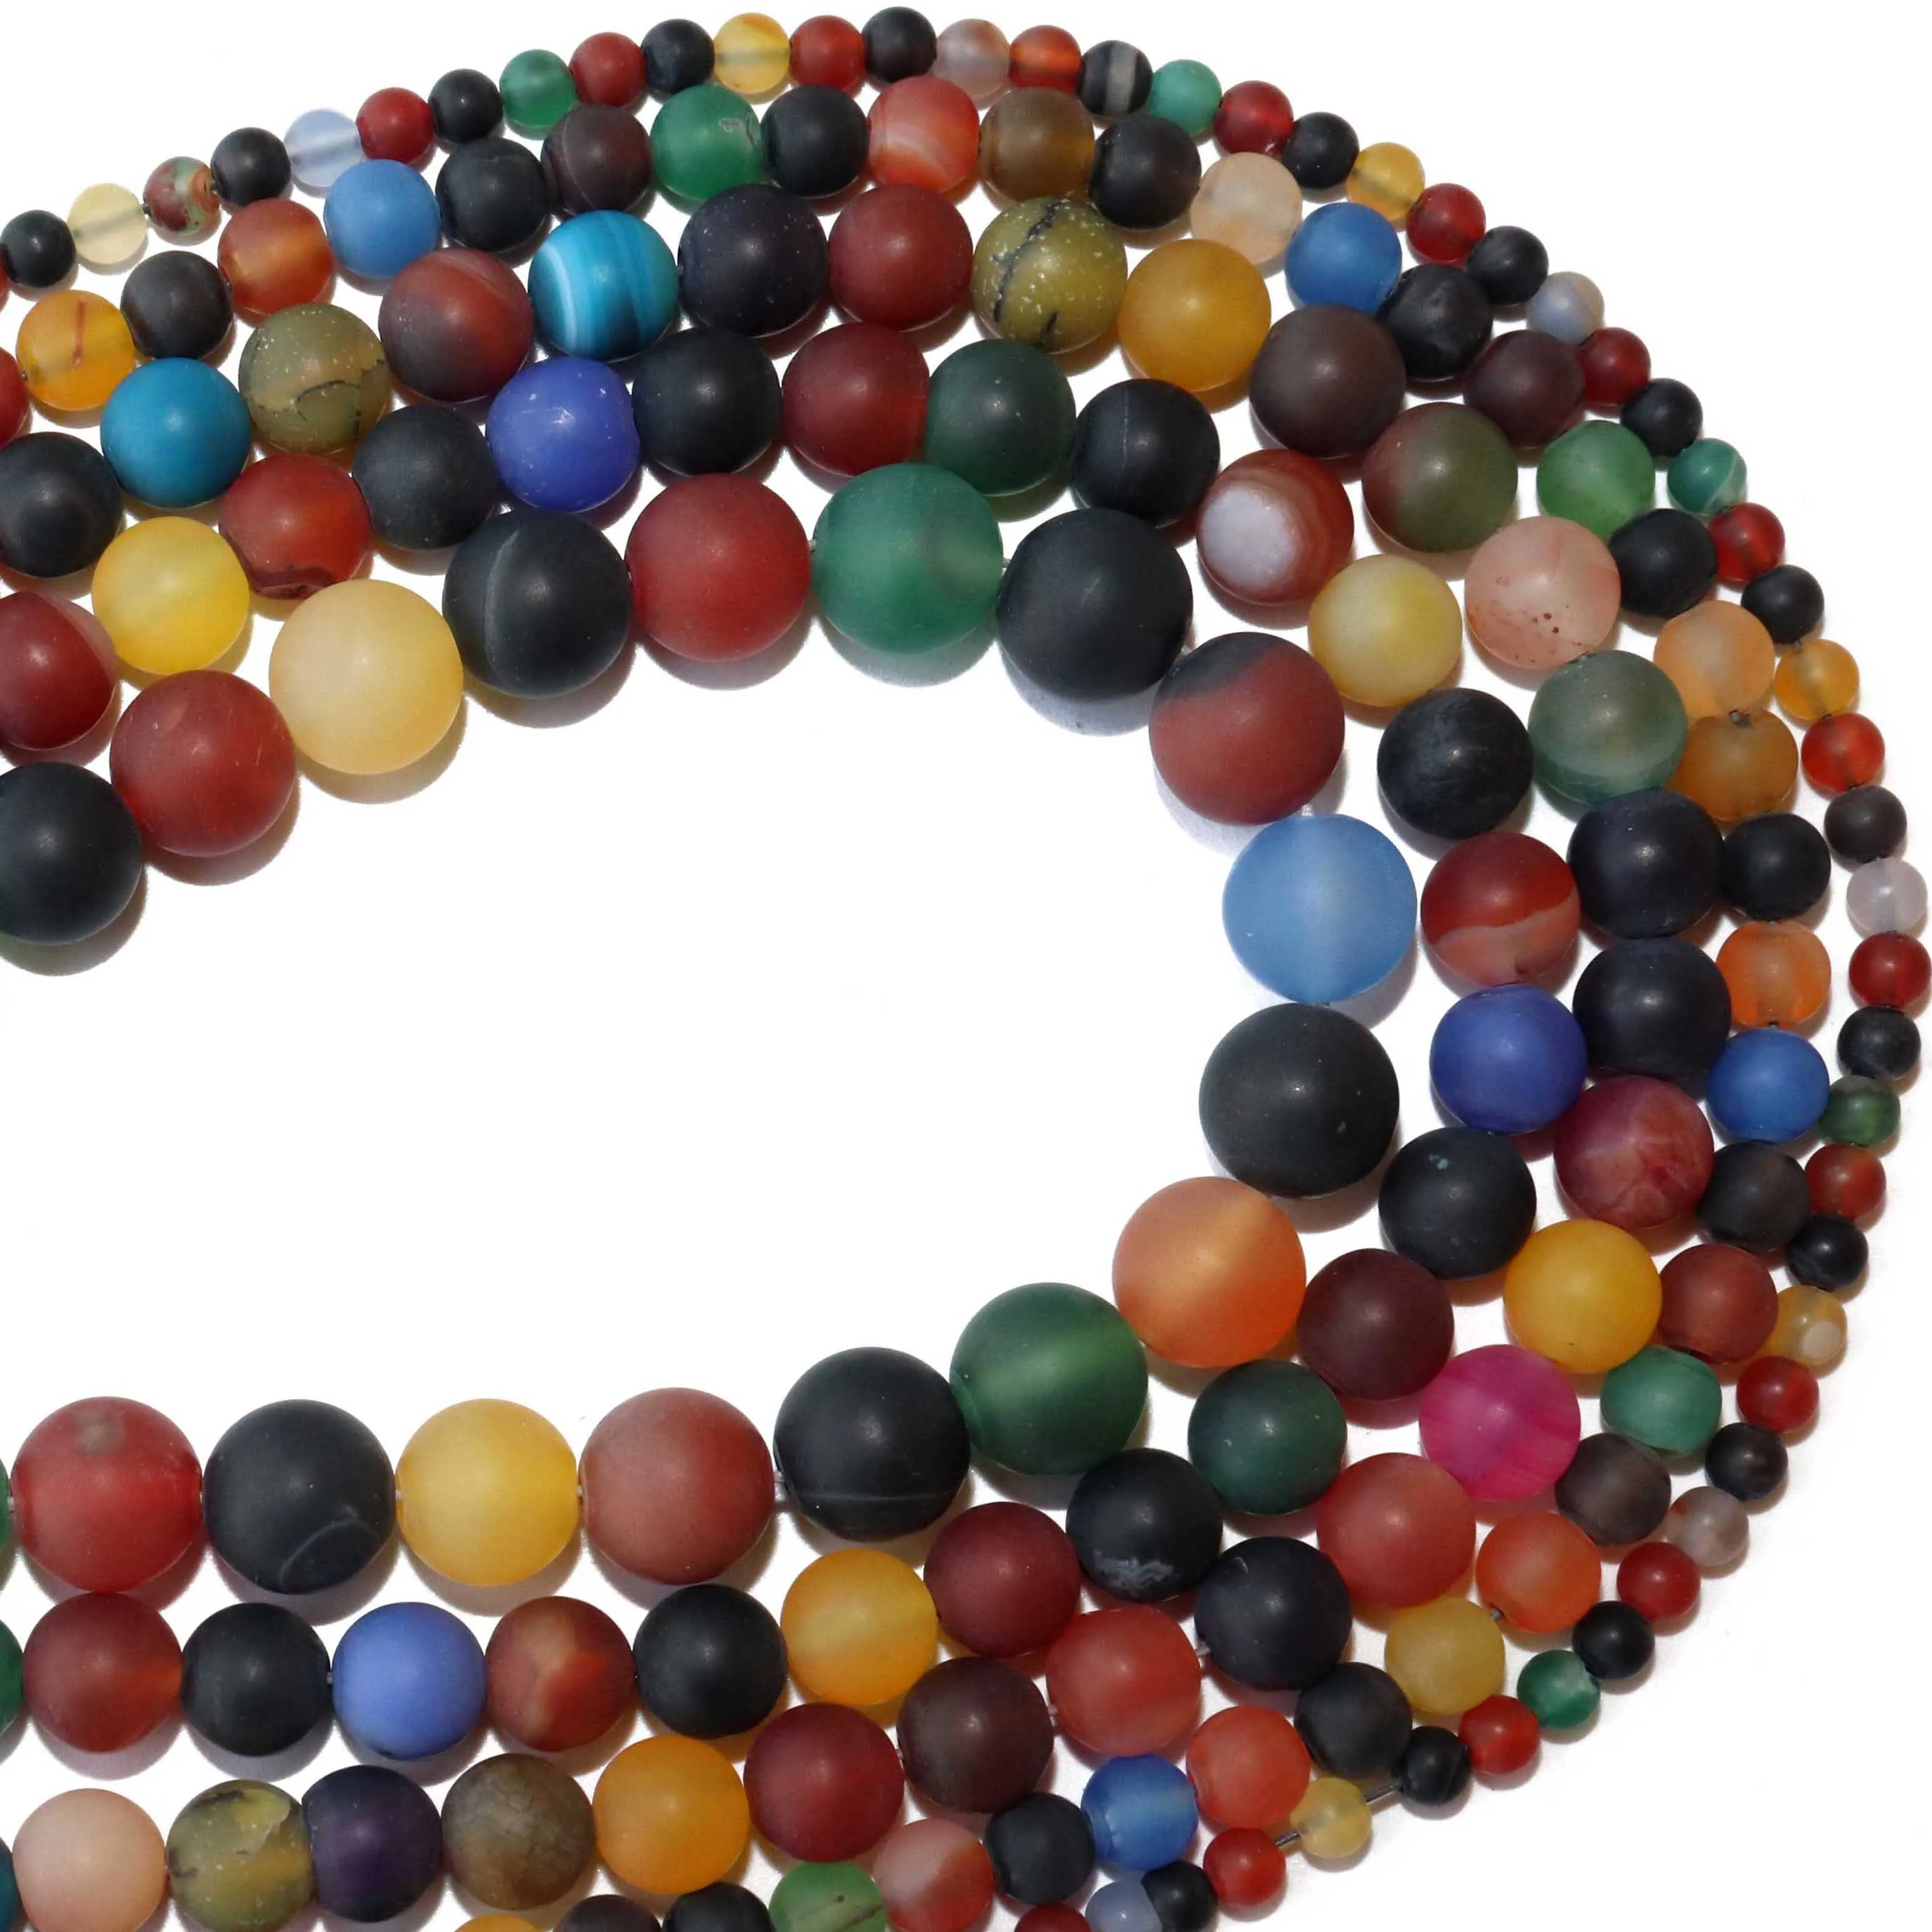 

Free Shipping Dull Polish Matte Natural Stone Colorful Agates Beads 4 6 8 10 12 MM Pick Size For Jewelry Making Diy Bracelet